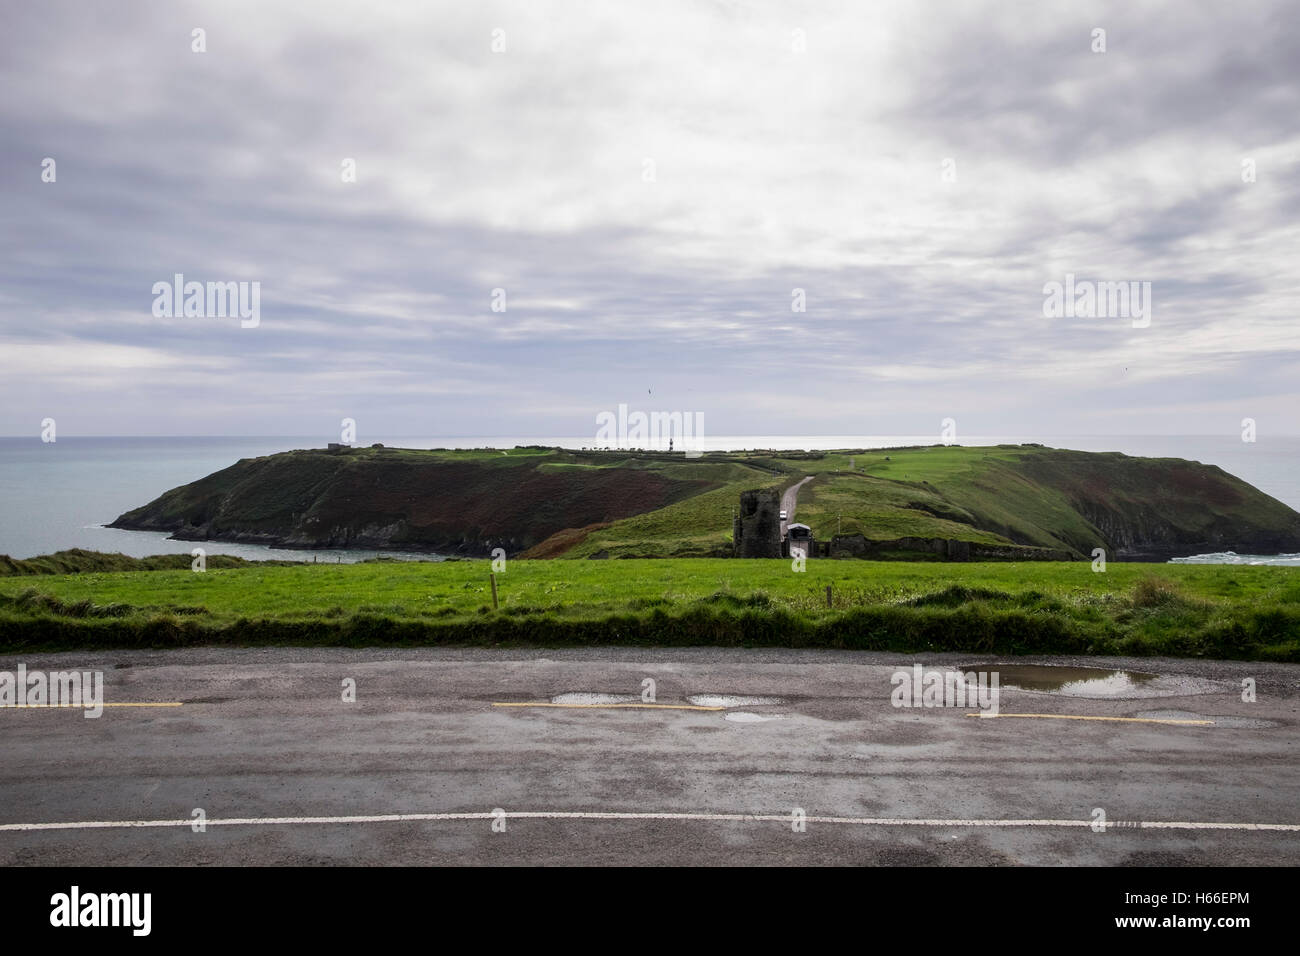 The old Head of Kinsale golf links and lighthouse, County Cork, Ireland. Stock Photo